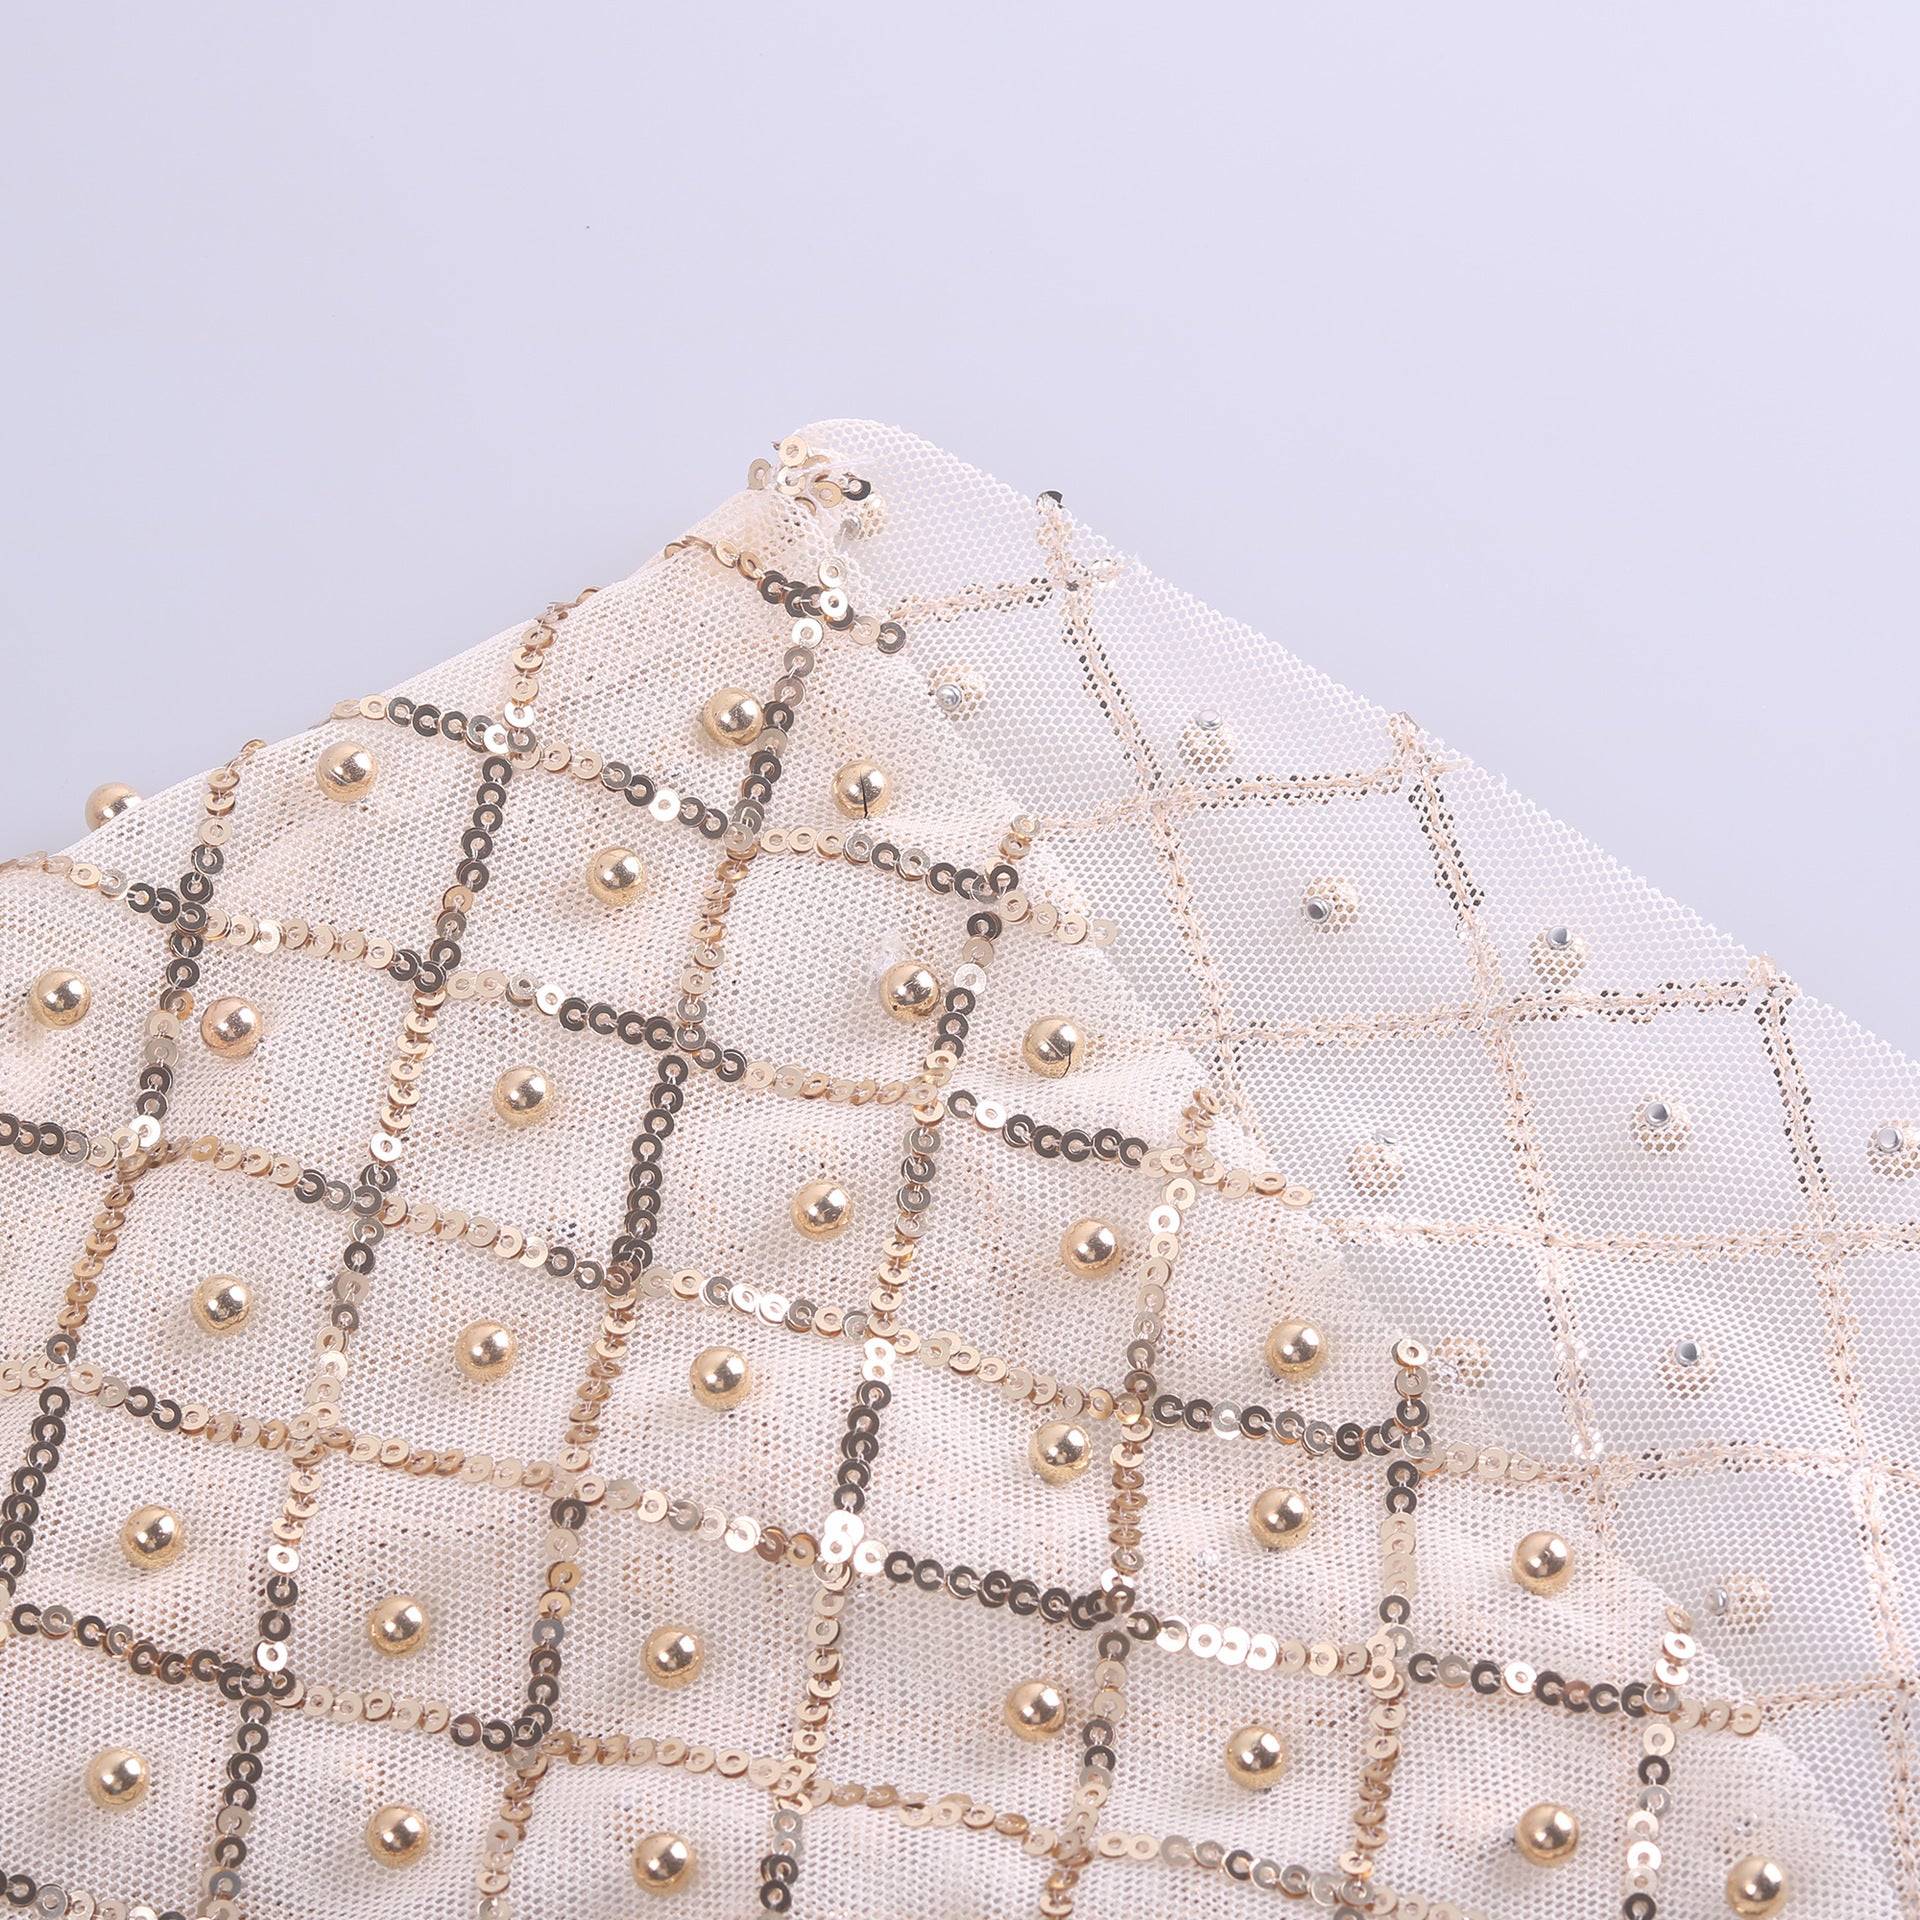 Close-up of a piece of fabric featuring a white and gold checkered pattern adorned with pearls and sequins, reminiscent of celebrity style. Crafted from durable polyester fiber, this material exudes elegance perfect for long sleeve designs. This stunning detail is part of the Mesh Studded Sequin Long-sleeved Shirt by Maramalive™.